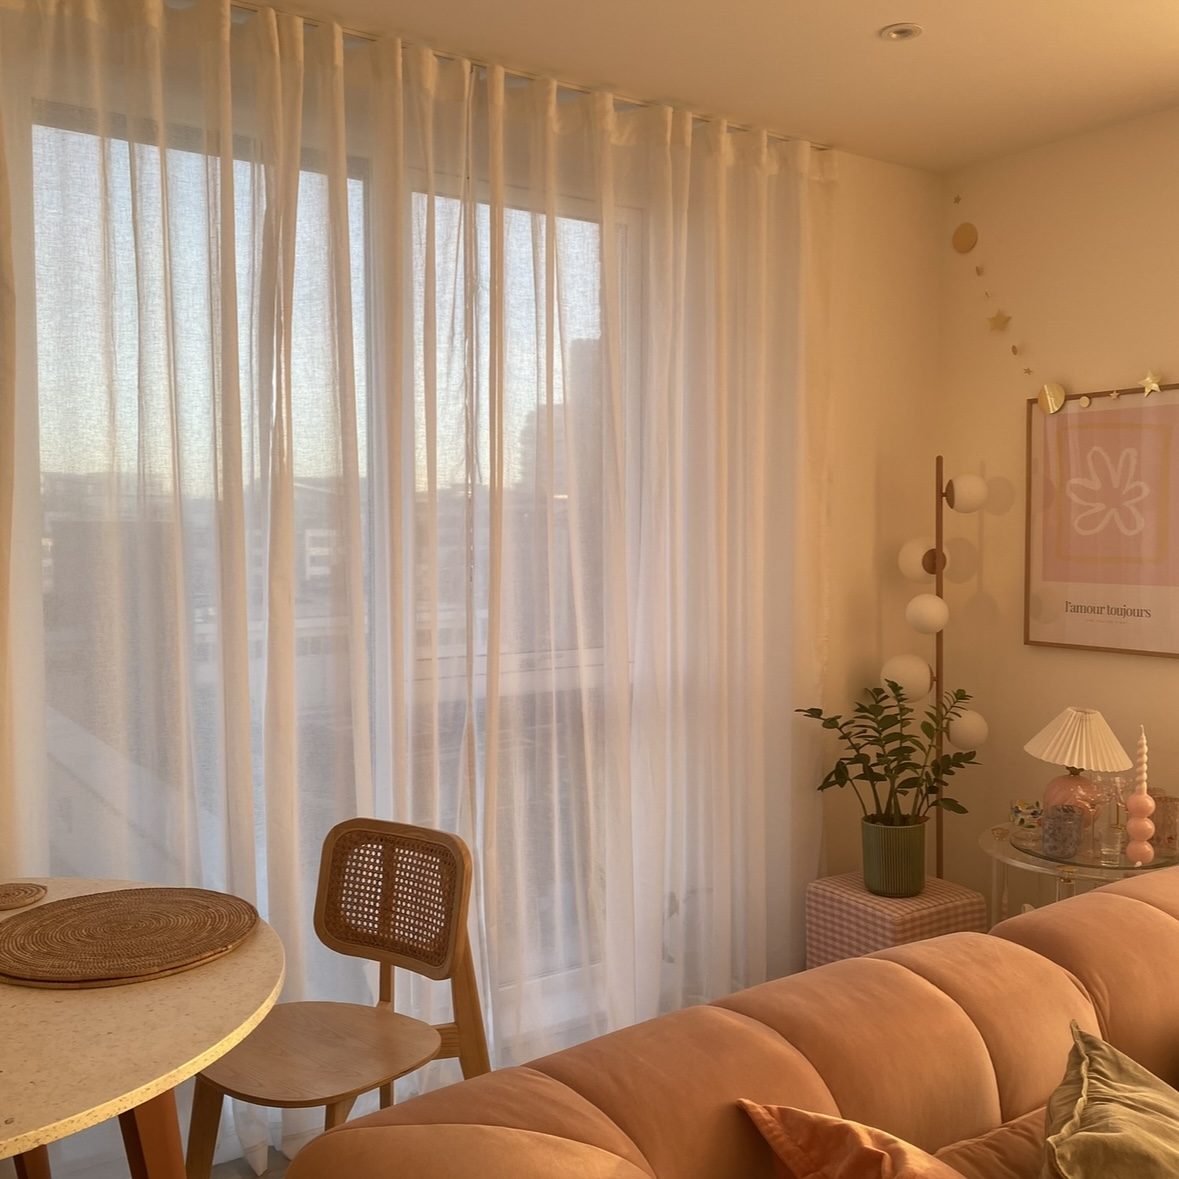 Image of sheer track curtains in a apartment living room.